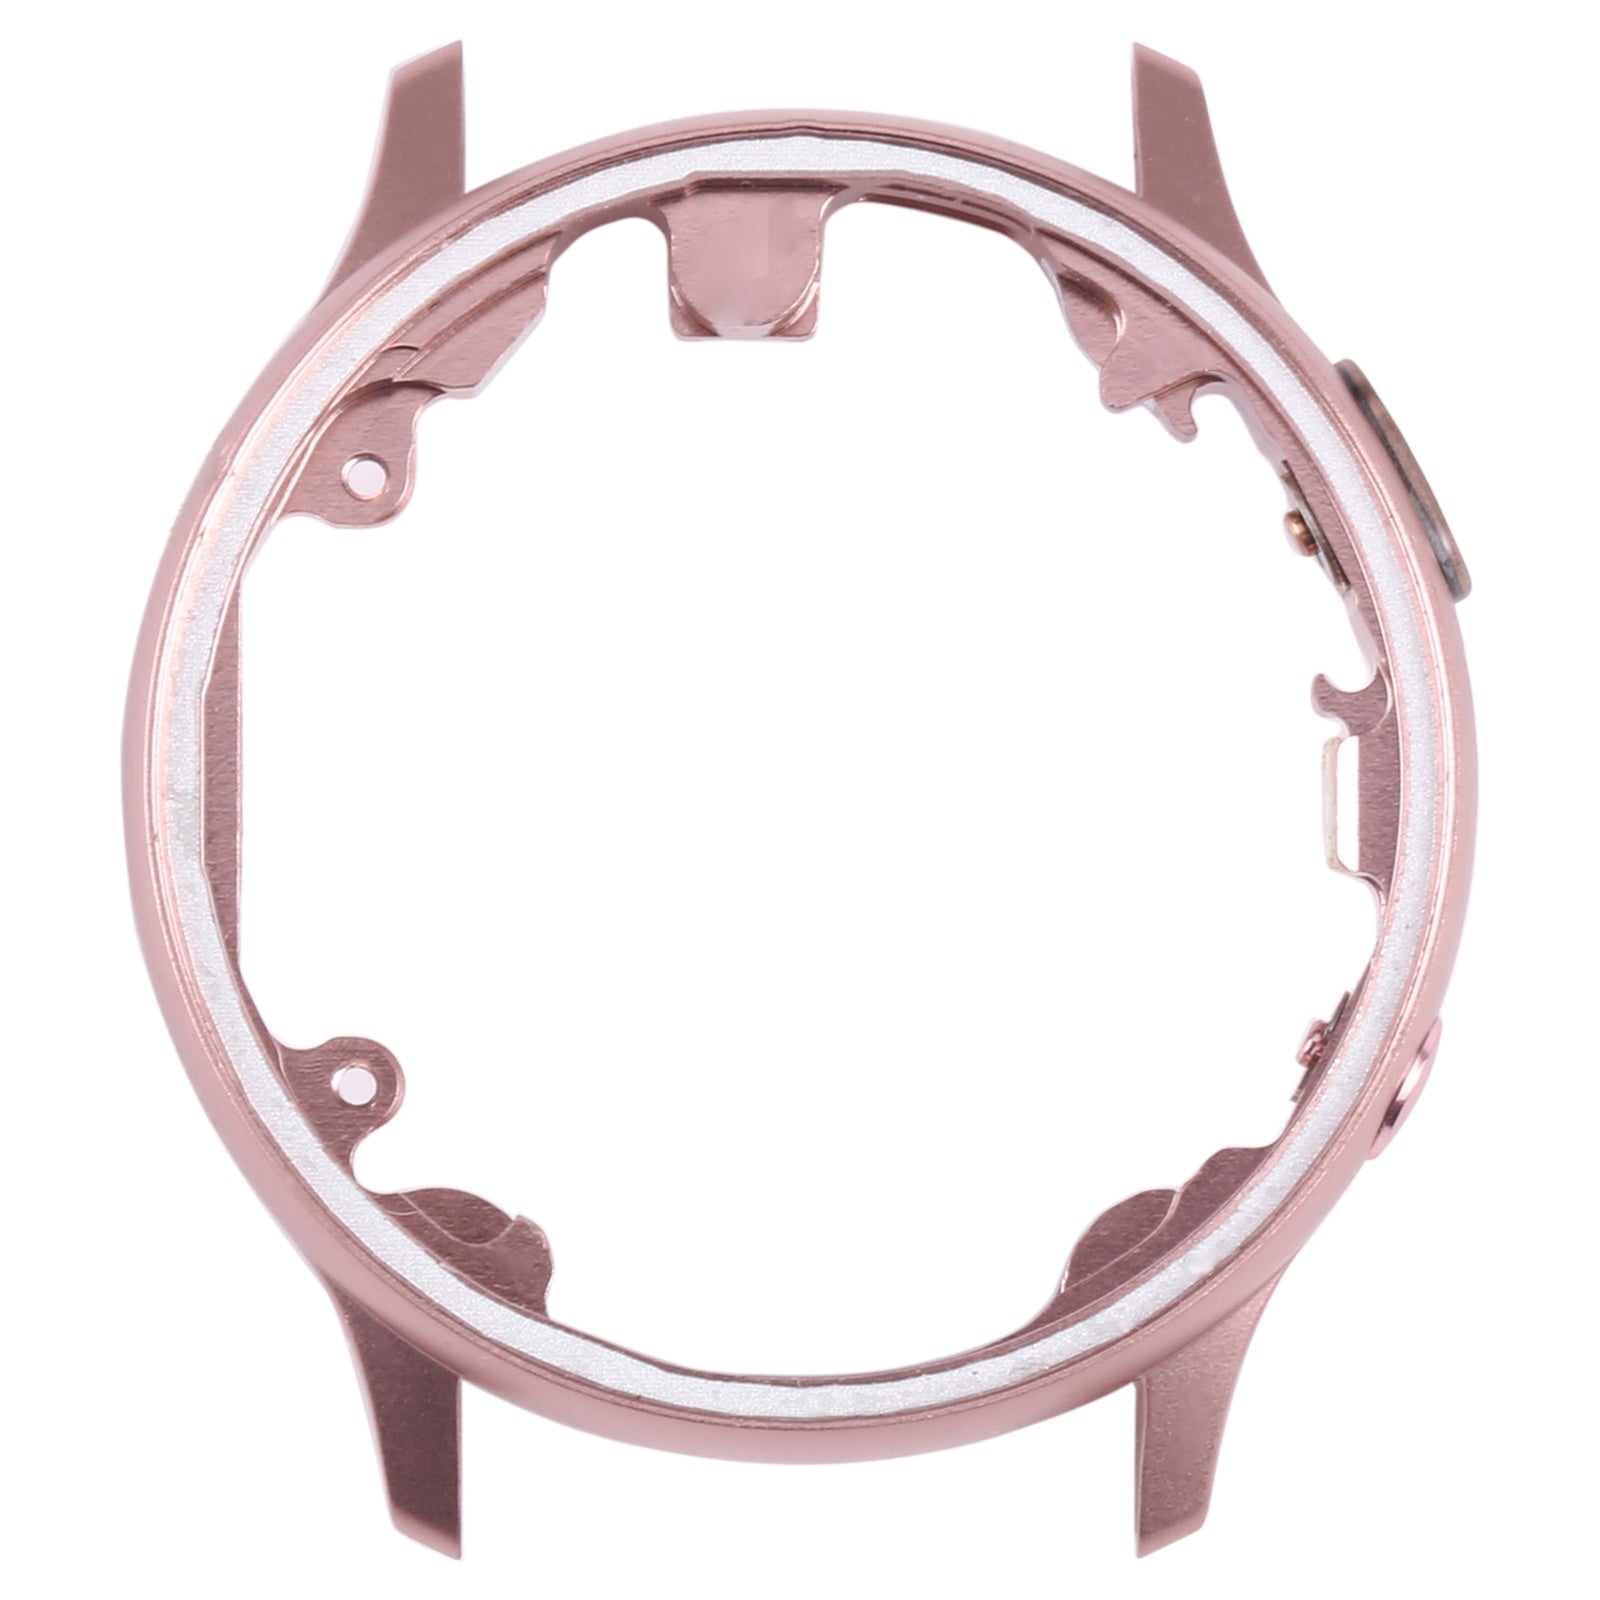 Chassis Front Frame Screen Samsung Galaxy Watch Active2 40 mm R830 Pink